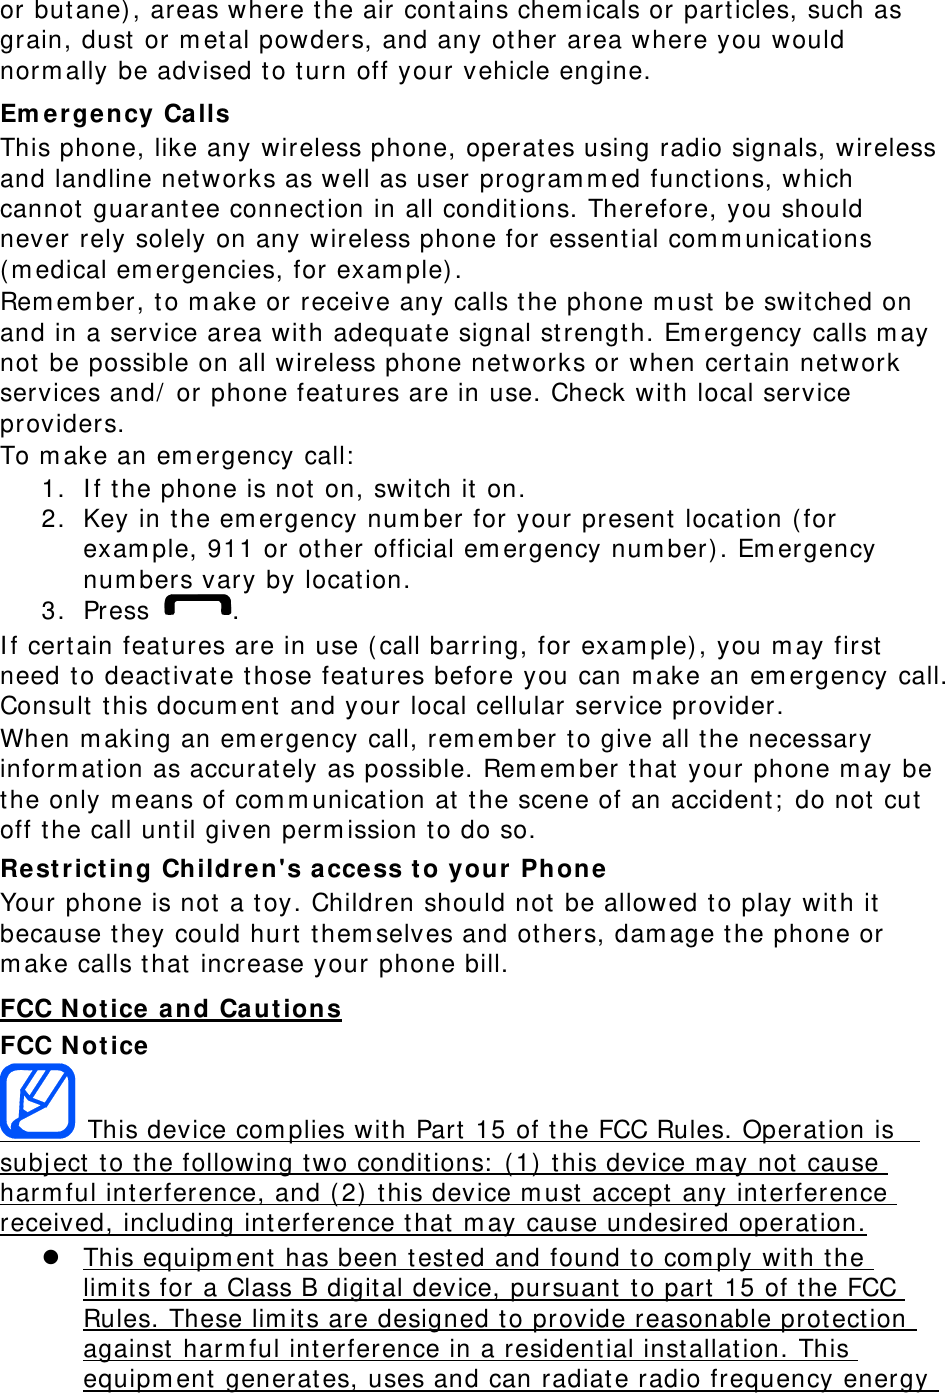 or but ane), areas where the air cont ains chem icals or part icles, such as grain, dust  or m et al powders, and any other area where you would norm ally be advised t o turn off your vehicle engine. Em e rgency Ca lls This phone, like any wireless phone, operates using radio signals, wireless and landline networks as well as user program m ed funct ions, which cannot guarant ee connection in all conditions. Therefore, you should never rely solely on any wireless phone for essent ial com m unications ( m edical em ergencies, for exam ple) . Rem em ber, to m ake or receive any calls t he phone m ust  be switched on and in a service area with adequate signal strengt h. Em ergency calls m ay not be possible on all wireless phone networks or when certain network services and/  or phone features are in use. Check with local service providers. To m ake an em ergency call:  1. I f t he phone is not on, swit ch it on. 2. Key in t he em ergency num ber for your present  location (for exam ple, 911 or ot her official em ergency num ber) . Em ergency num bers vary by locat ion. 3. Press  . I f certain feat ures are in use (call barring, for exam ple), you m ay first  need t o deact ivat e t hose feat ures before you can m ake an em ergency call. Consult t his docum ent  and your local cellular service provider. When m aking an em ergency call, rem em ber t o give all t he necessary inform ation as accurat ely as possible. Rem em ber that your phone m ay be the only m eans of com m unicat ion at  the scene of an accident ;  do not cut  off t he call unt il given perm ission t o do so. Restrict ing Childre n&apos;s a cce ss to your  Phone Your phone is not a t oy. Children should not be allowed to play with it  because they could hurt  them selves and others, dam age the phone or m ake calls t hat increase your phone bill. FCC N ot ice an d Caut ions FCC N ot ice  This device com plies with Part 15 of t he FCC Rules. Operation is   subj ect  to the following two conditions:  ( 1)  t his device m ay not  cause harm ful interference, and ( 2)  t his device m ust  accept any int erference received, including interference that m ay cause undesired operation.  This equipm ent has been t est ed and found to com ply wit h t he lim its for a Class B digital device, pursuant  to part 15 of t he FCC Rules. These lim it s are designed t o provide reasonable protect ion against  harm ful int erference in a residential inst allat ion. This equipm ent  generates, uses and can radiat e radio frequency energy 